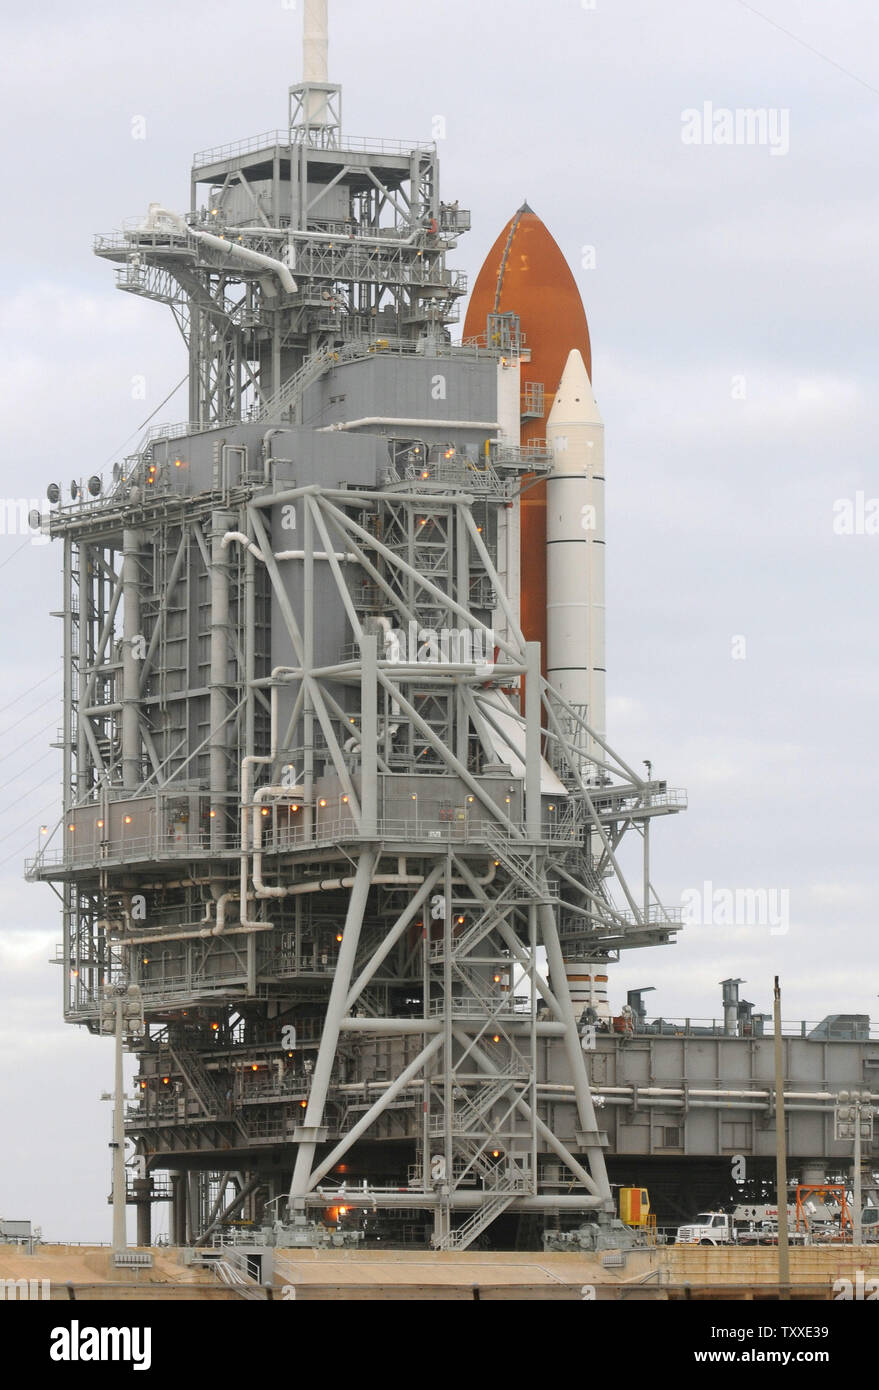 Space shuttle Atlantis sits poised for launch on Launch Complex 39A at the Kennedy Space Center in Florida on February 6, 2008. NASA is making final preparations to launch Atlantis on mission STS-122 on February 7 at 2:45 p.m. for an 11 day service mission to the International Space Station. Currently there is a 70% chance of bad weather delaying the launch. (UPI Photo/Kevin Dietsch) Stock Photo